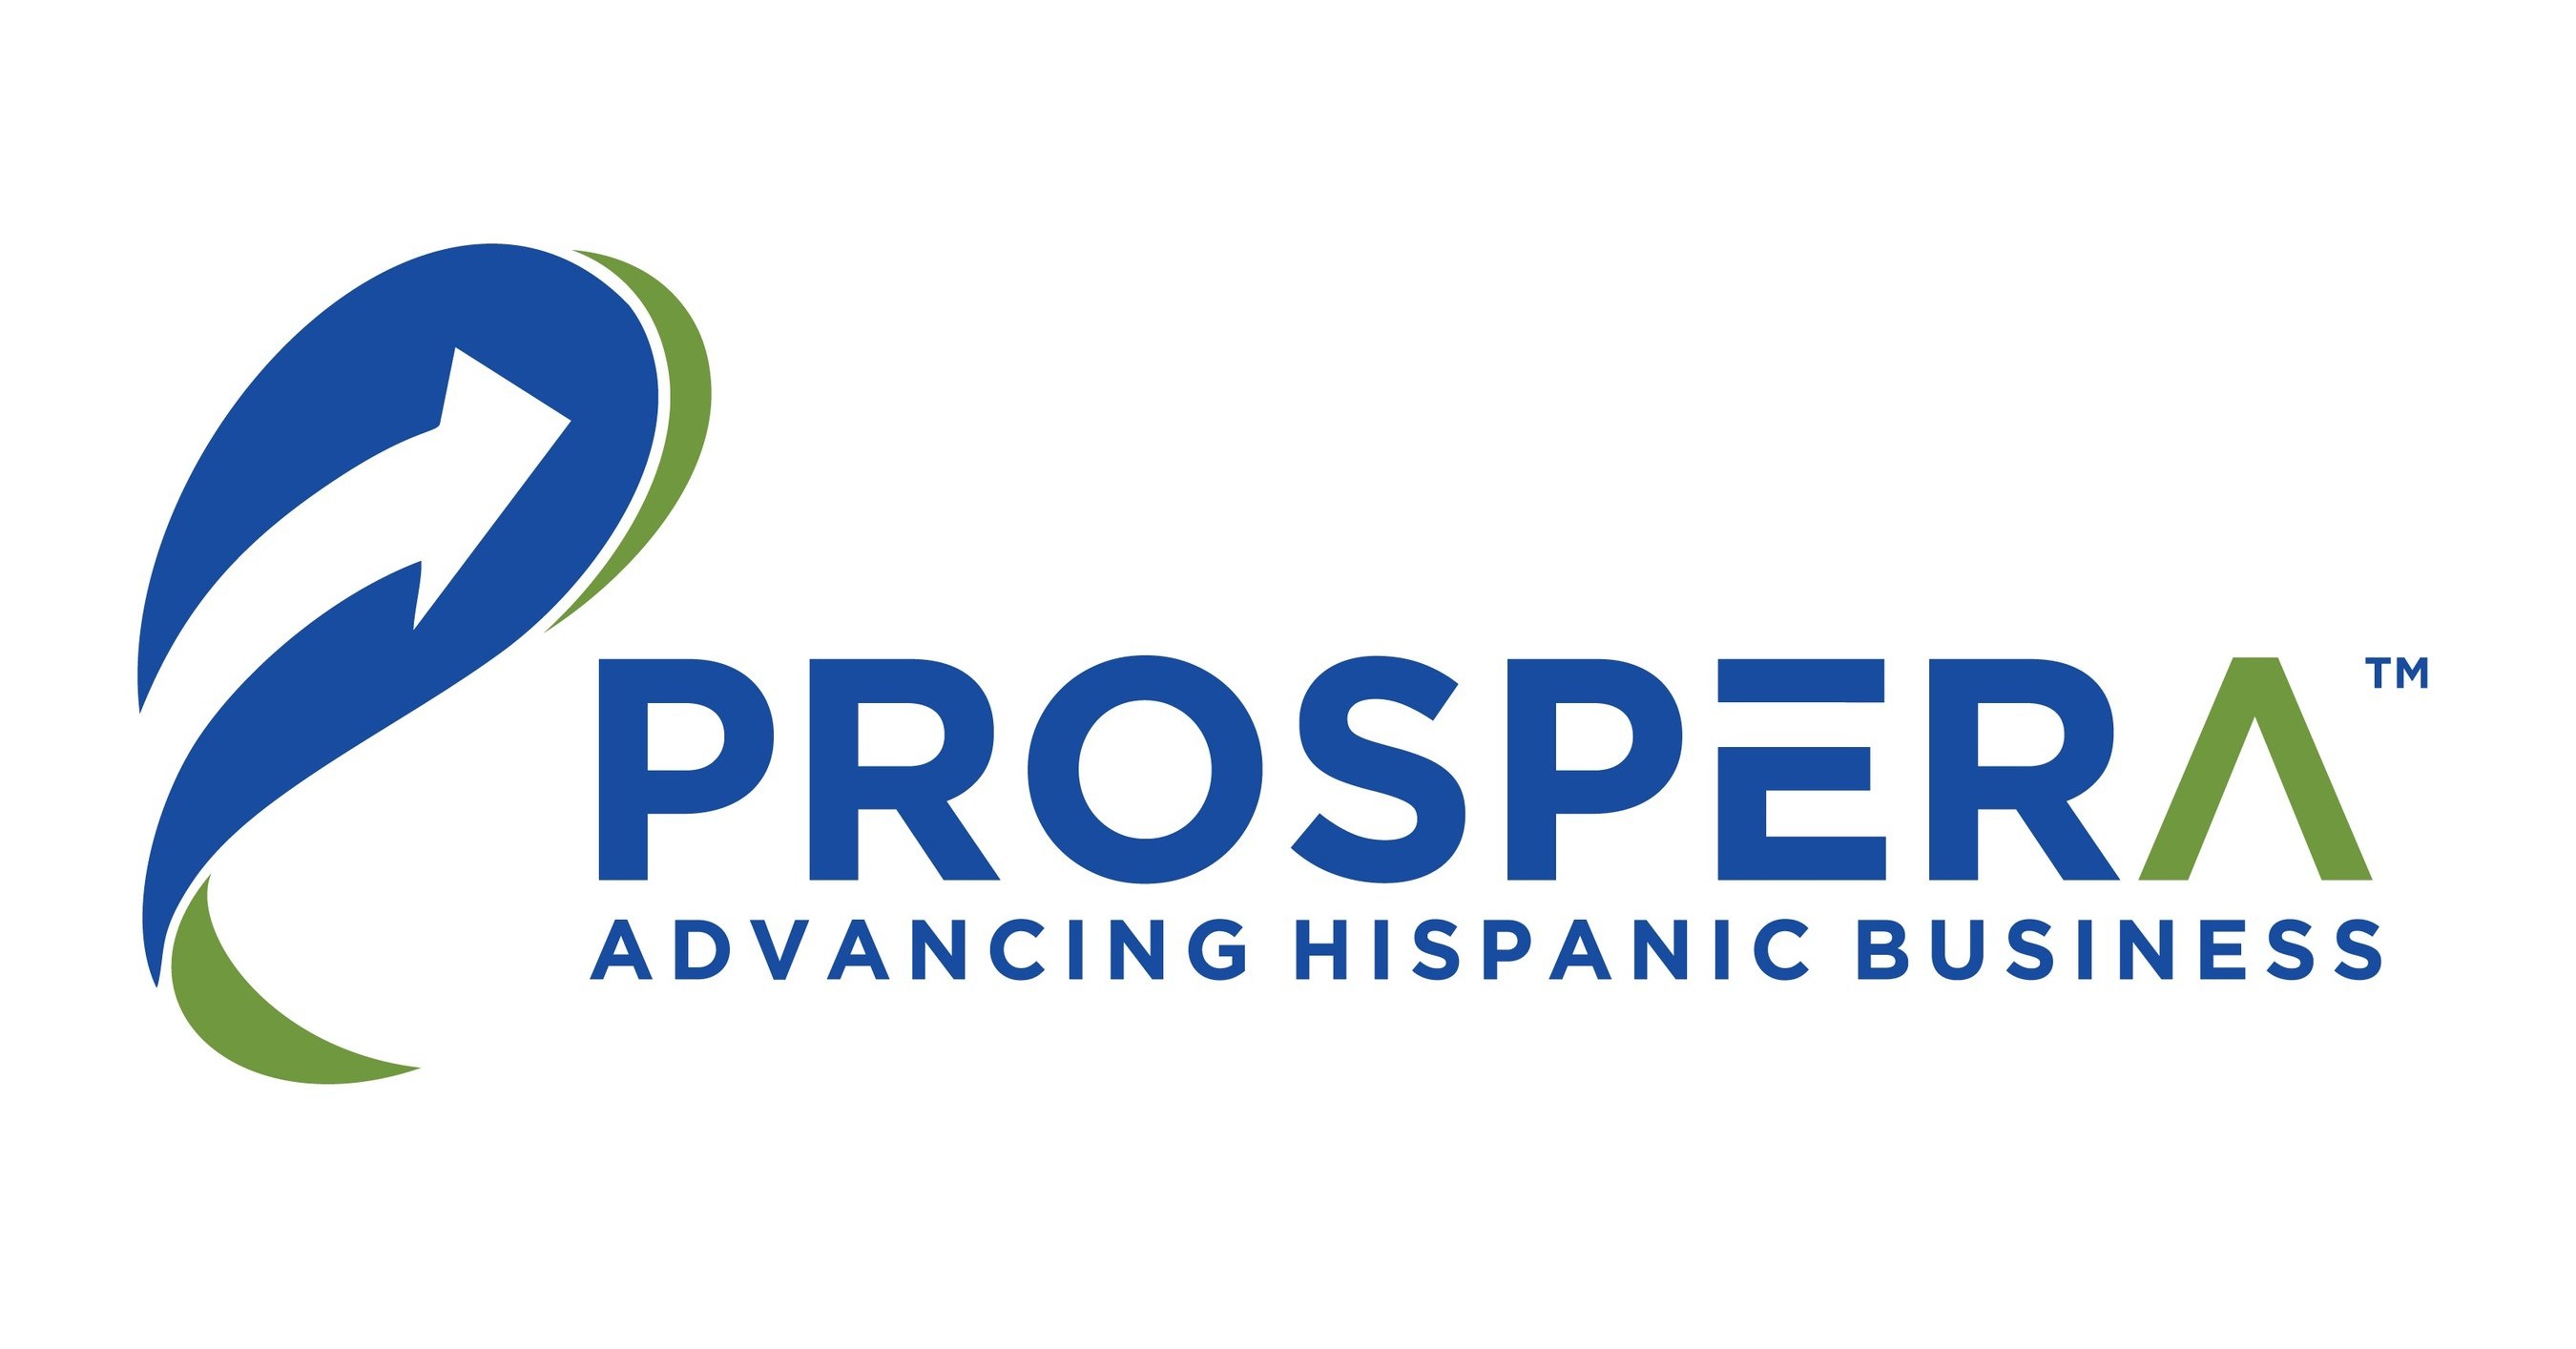 Prospera Partners with Comcast NBCUniversal and Telemundo Enterprises to Further more Support Hispanic-Owned Small Businesses